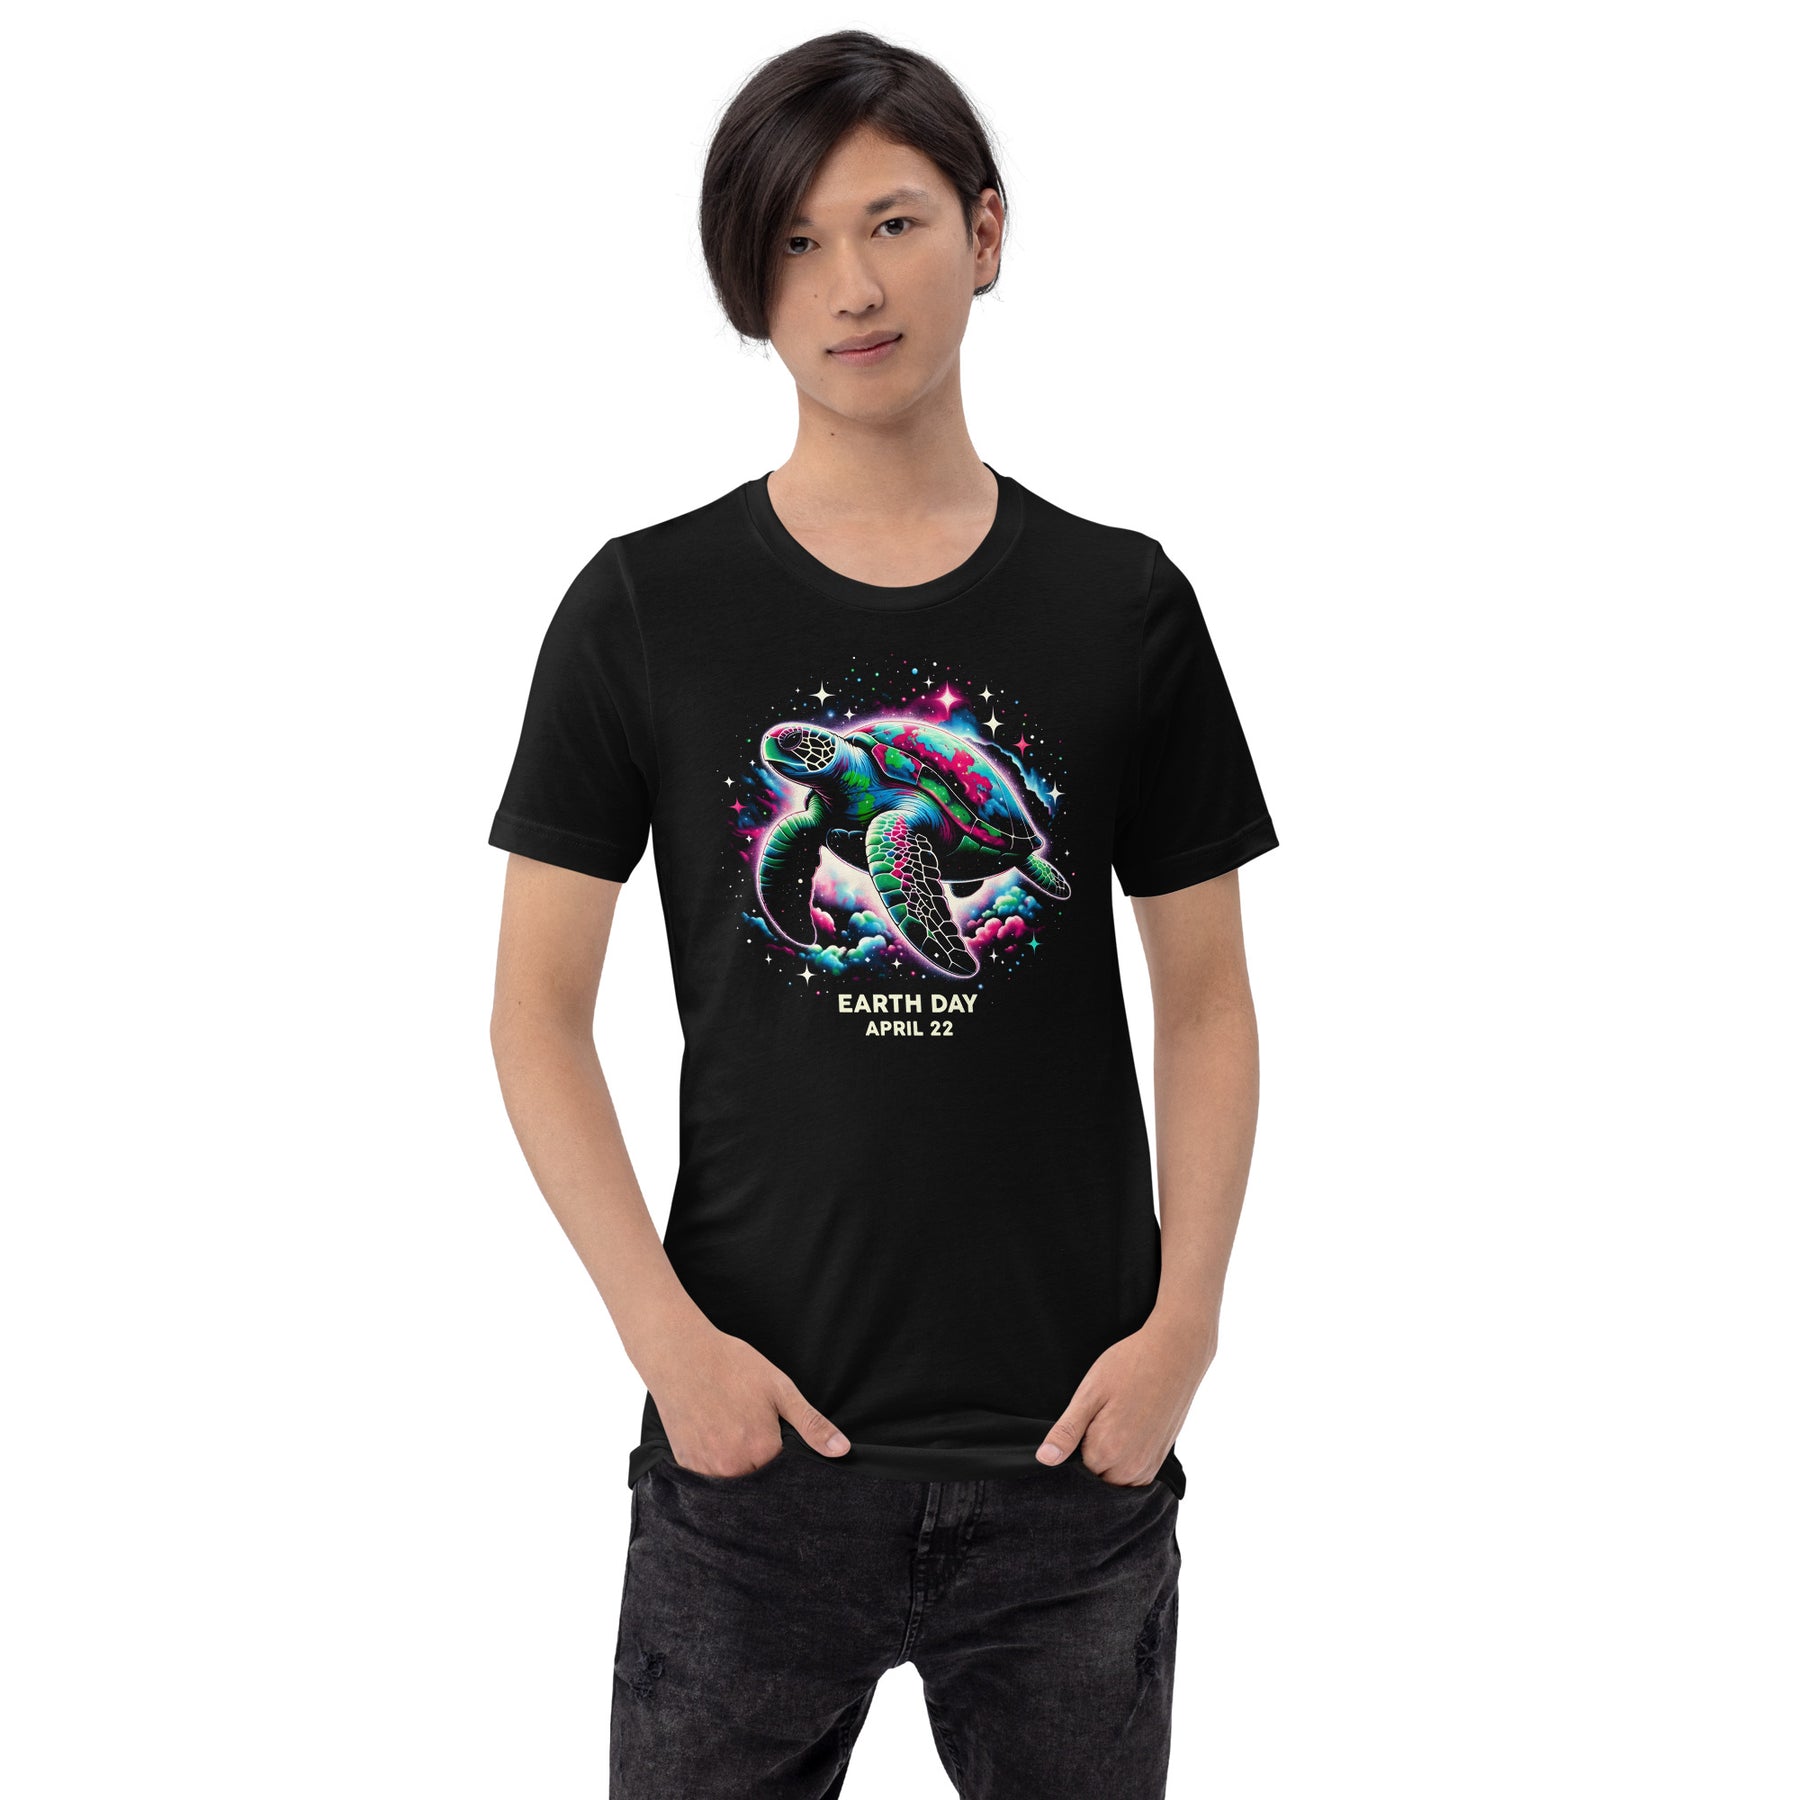 Earth Day Turtle Shirt, Outer Space Galaxy Sea Turtle Tee, Animal Activist Shirt, Environment Conservation Gift